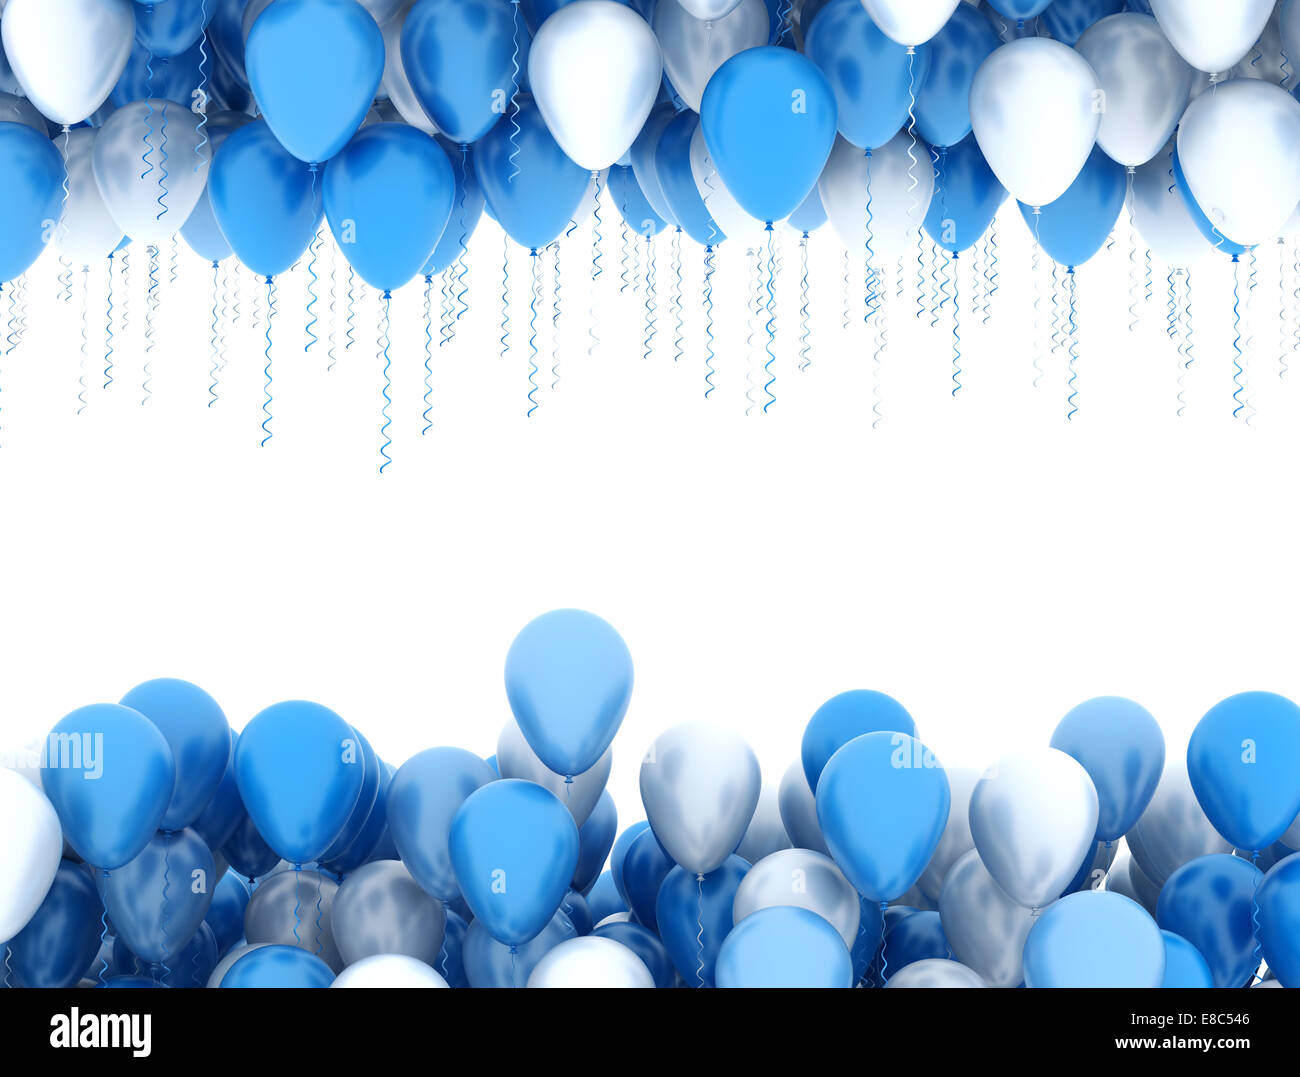 Blue and white party balloons isolated on white background Stock Photo